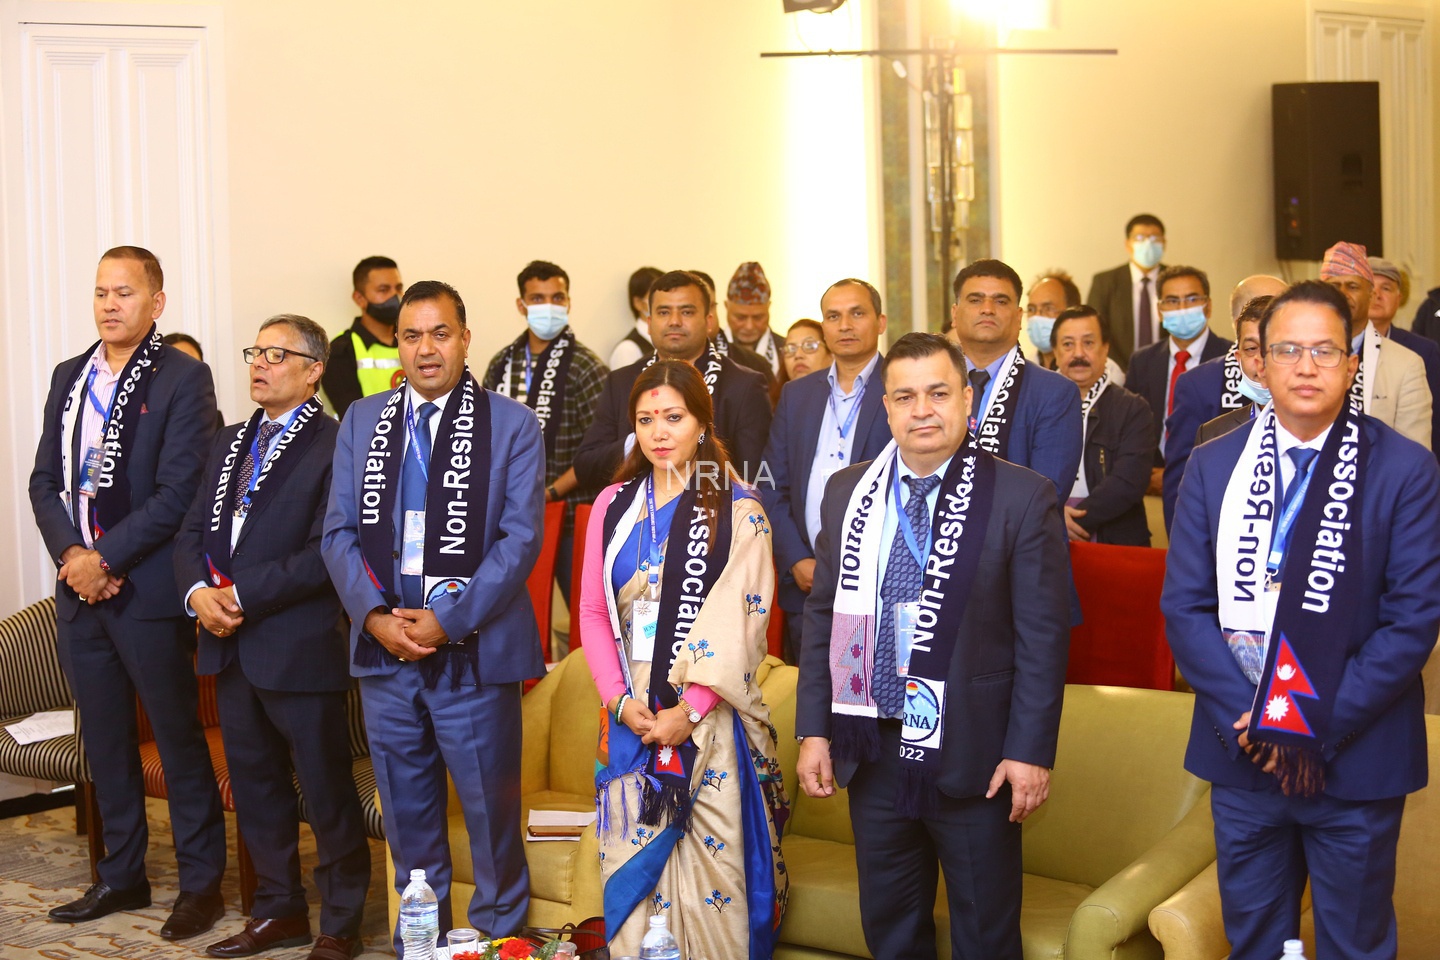 Some Glimpse of 10th NRN Global Conference